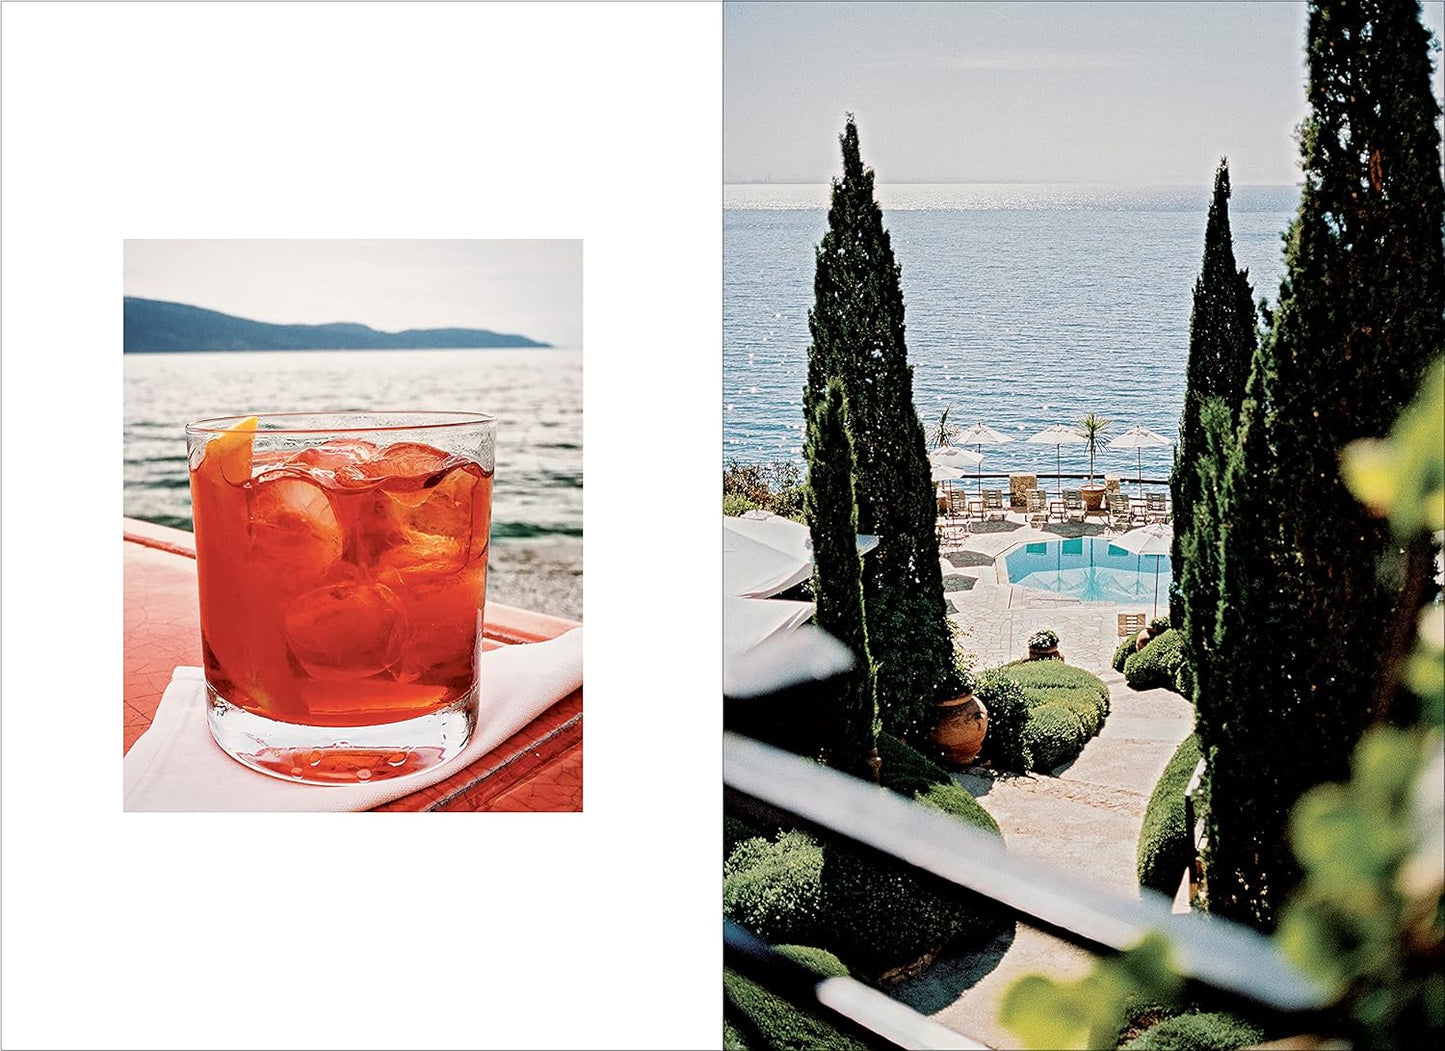 Negroni: A Love Affair with a Classic Cocktail